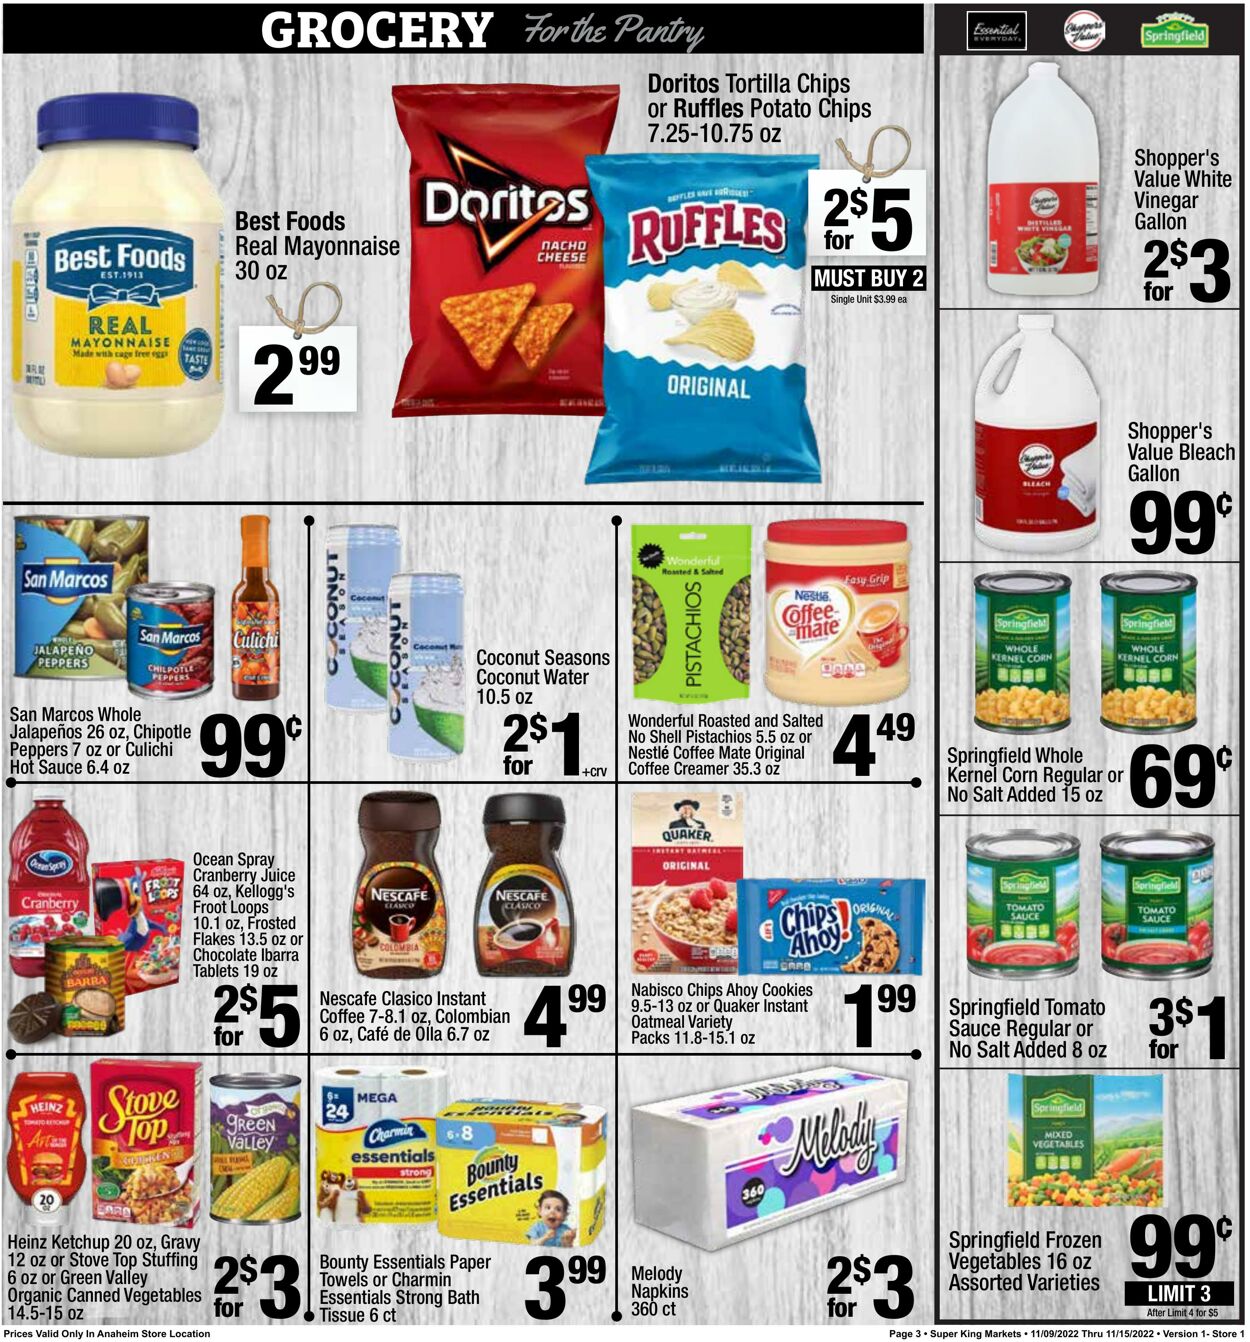 Weekly ad Super King Markets 11/09/0202 - 11/15/2022